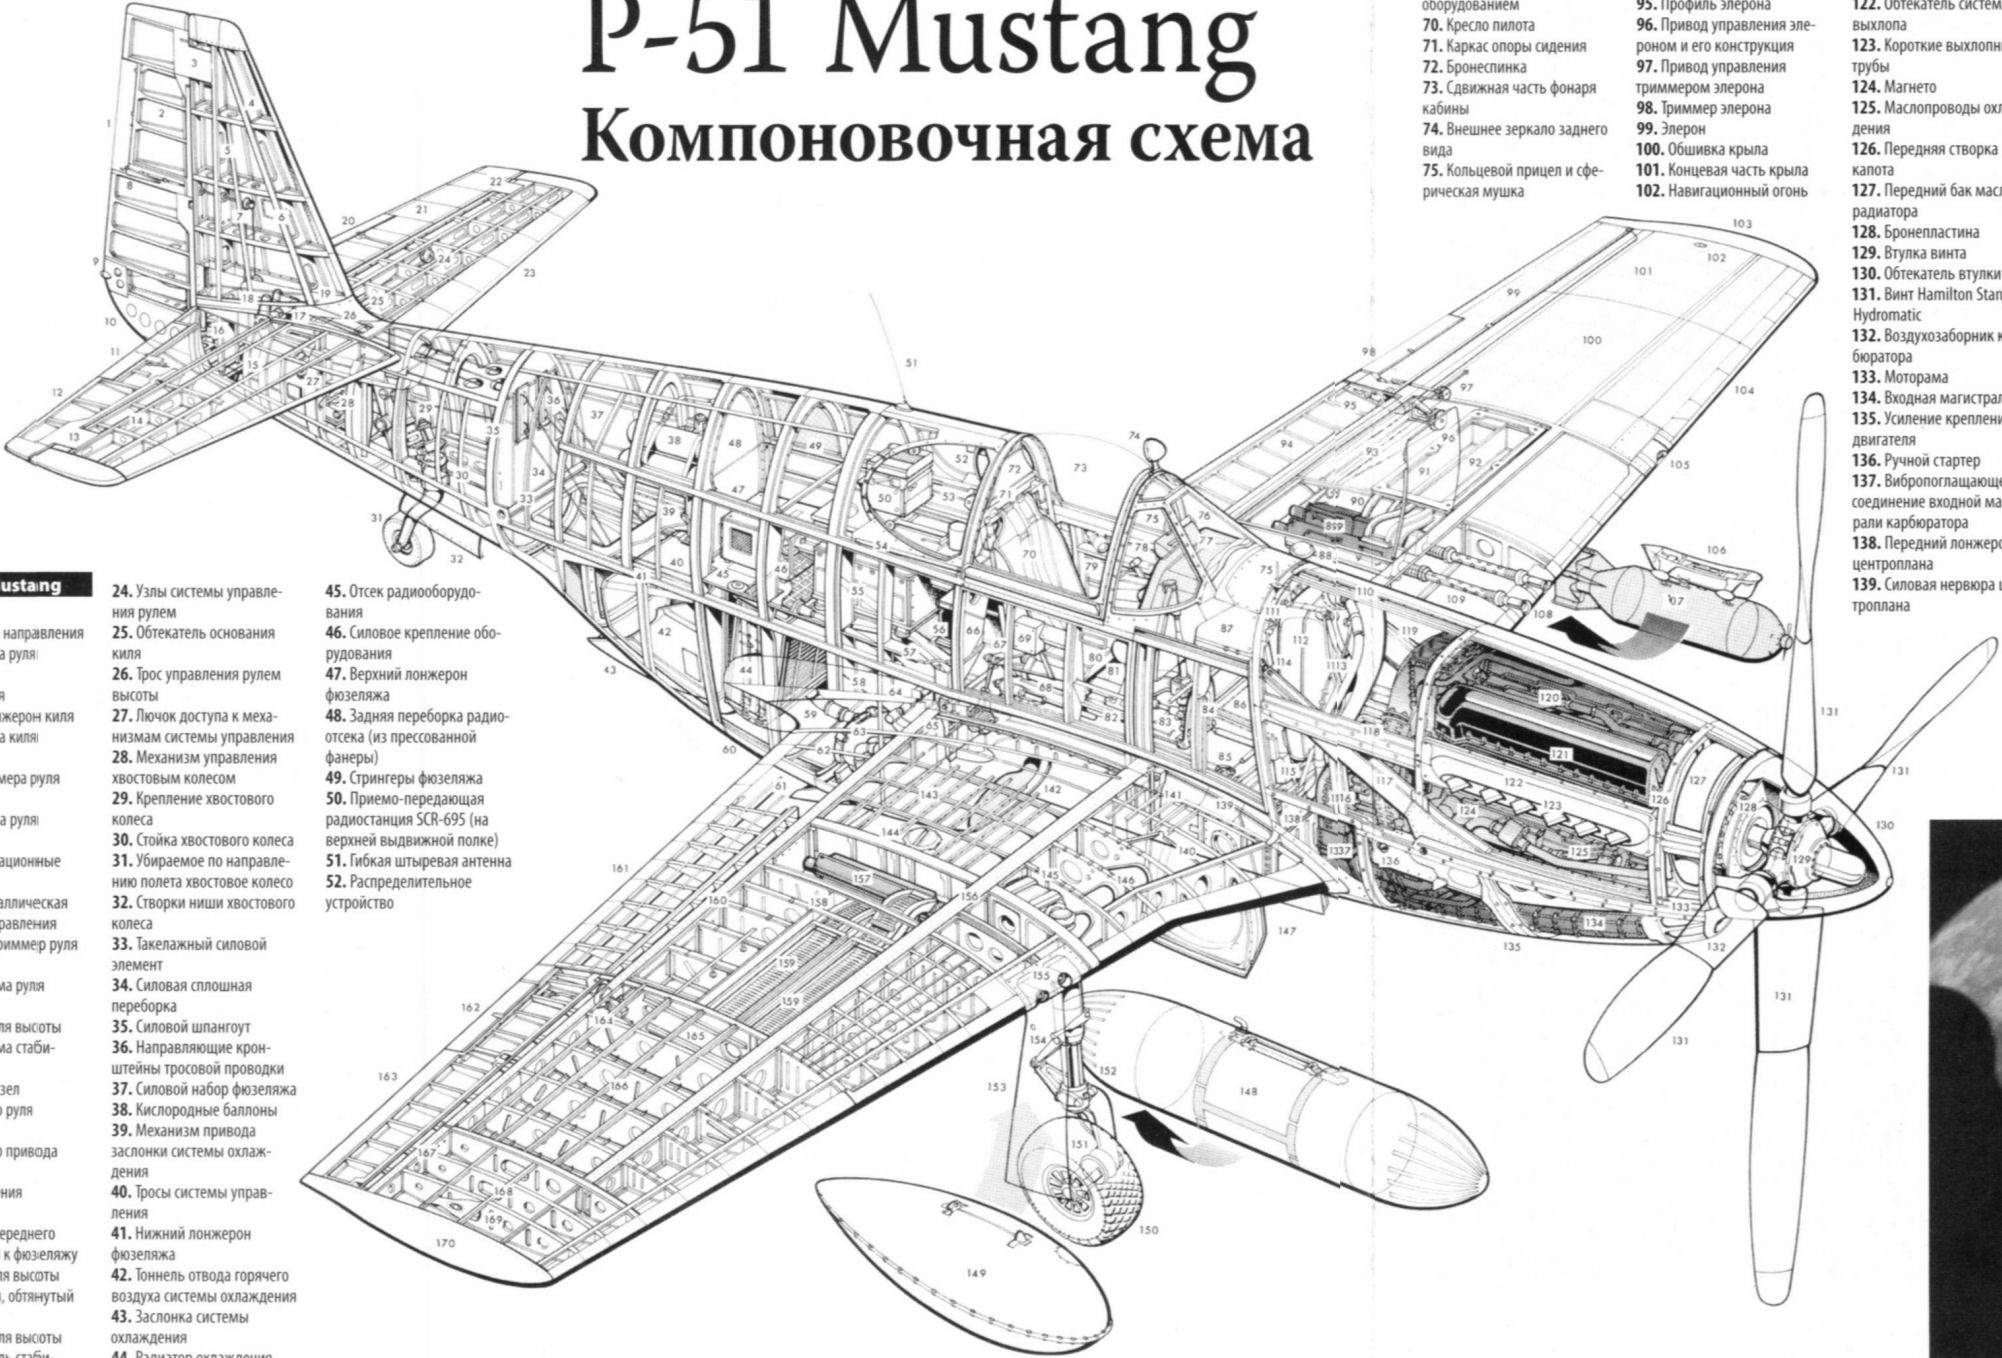 On1.click | north american p-51 mustang